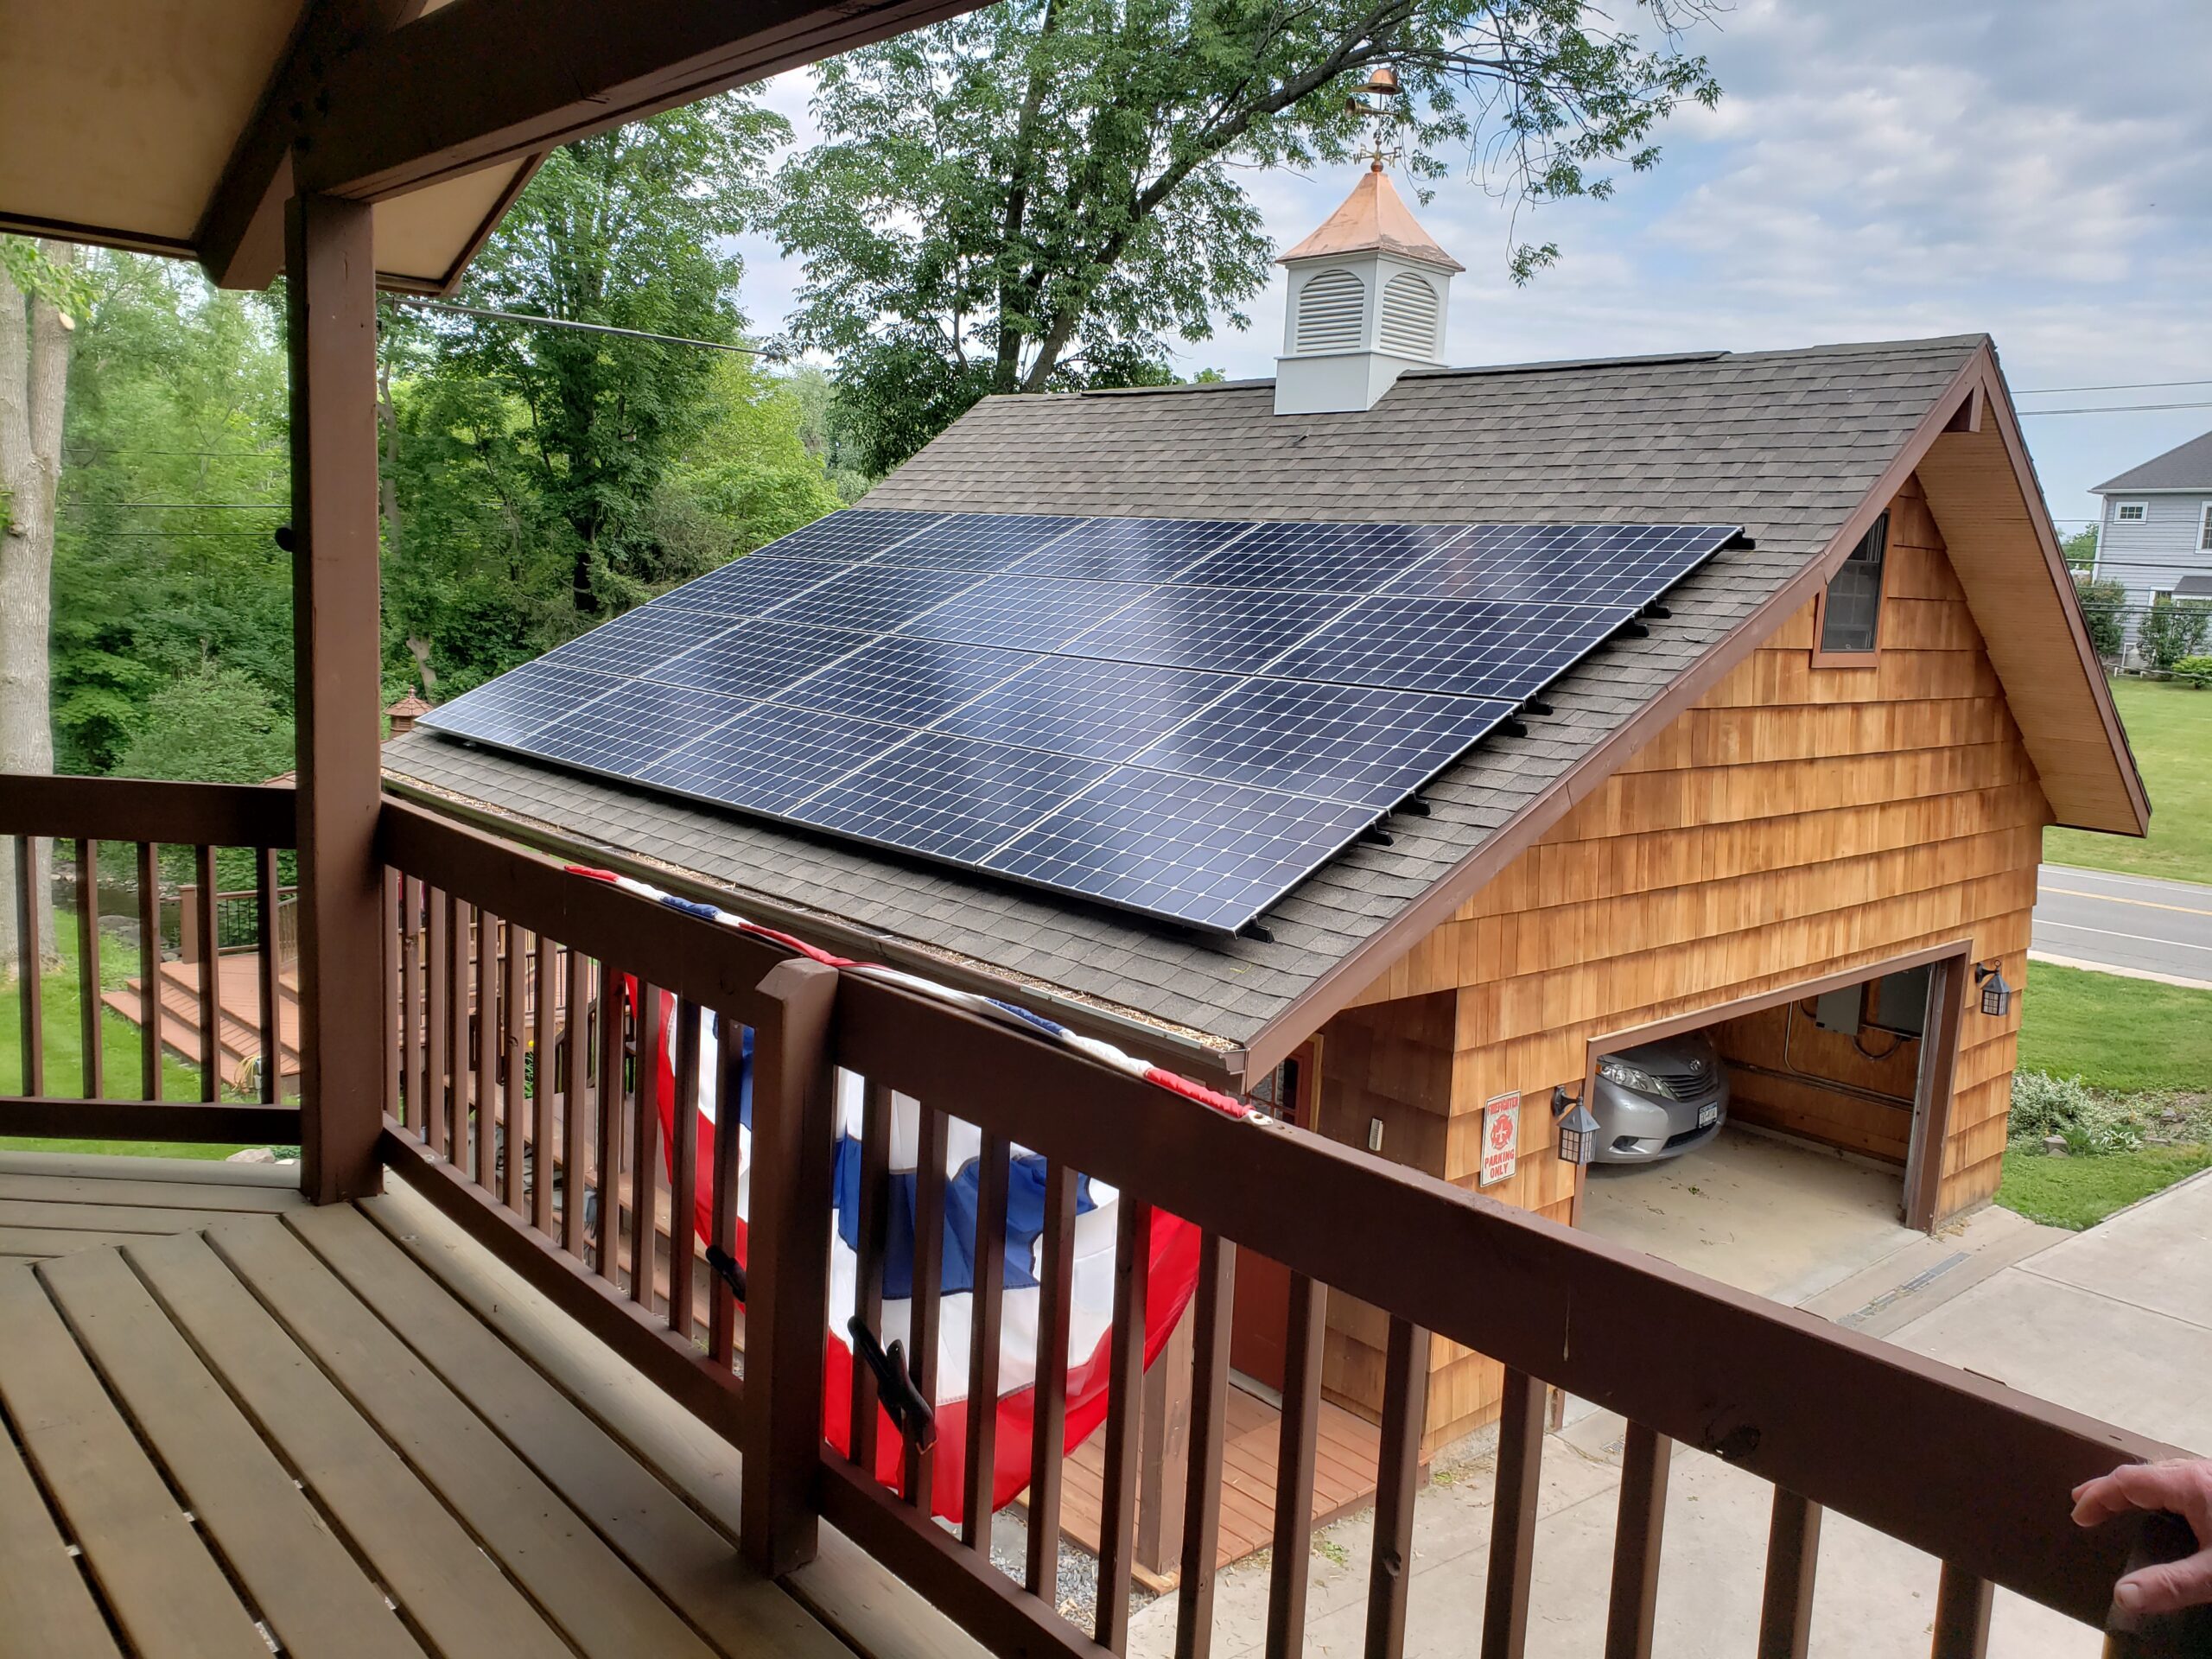 Move Toward Grid Independence With Solar